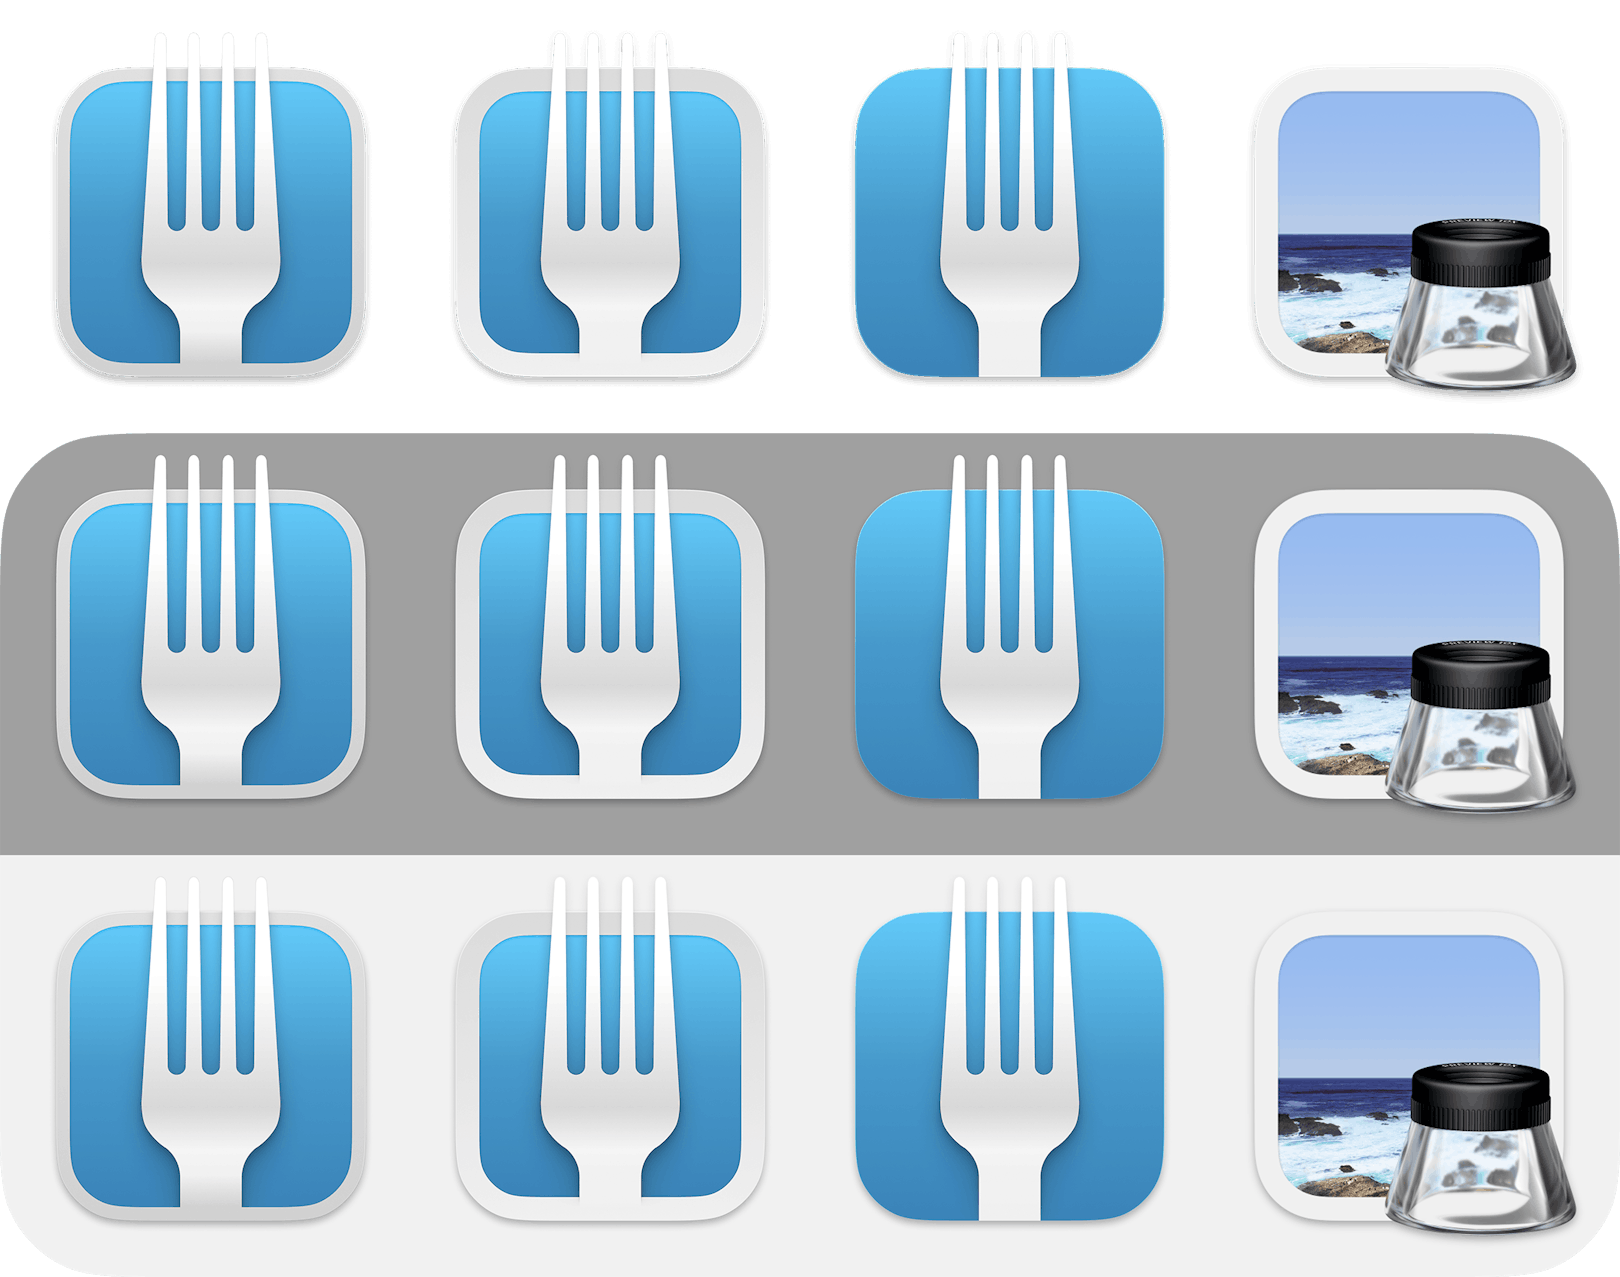 The Fork icon on various backgrounds. The image demonstrates whether the icon functions effectively on different background levels of brightness.